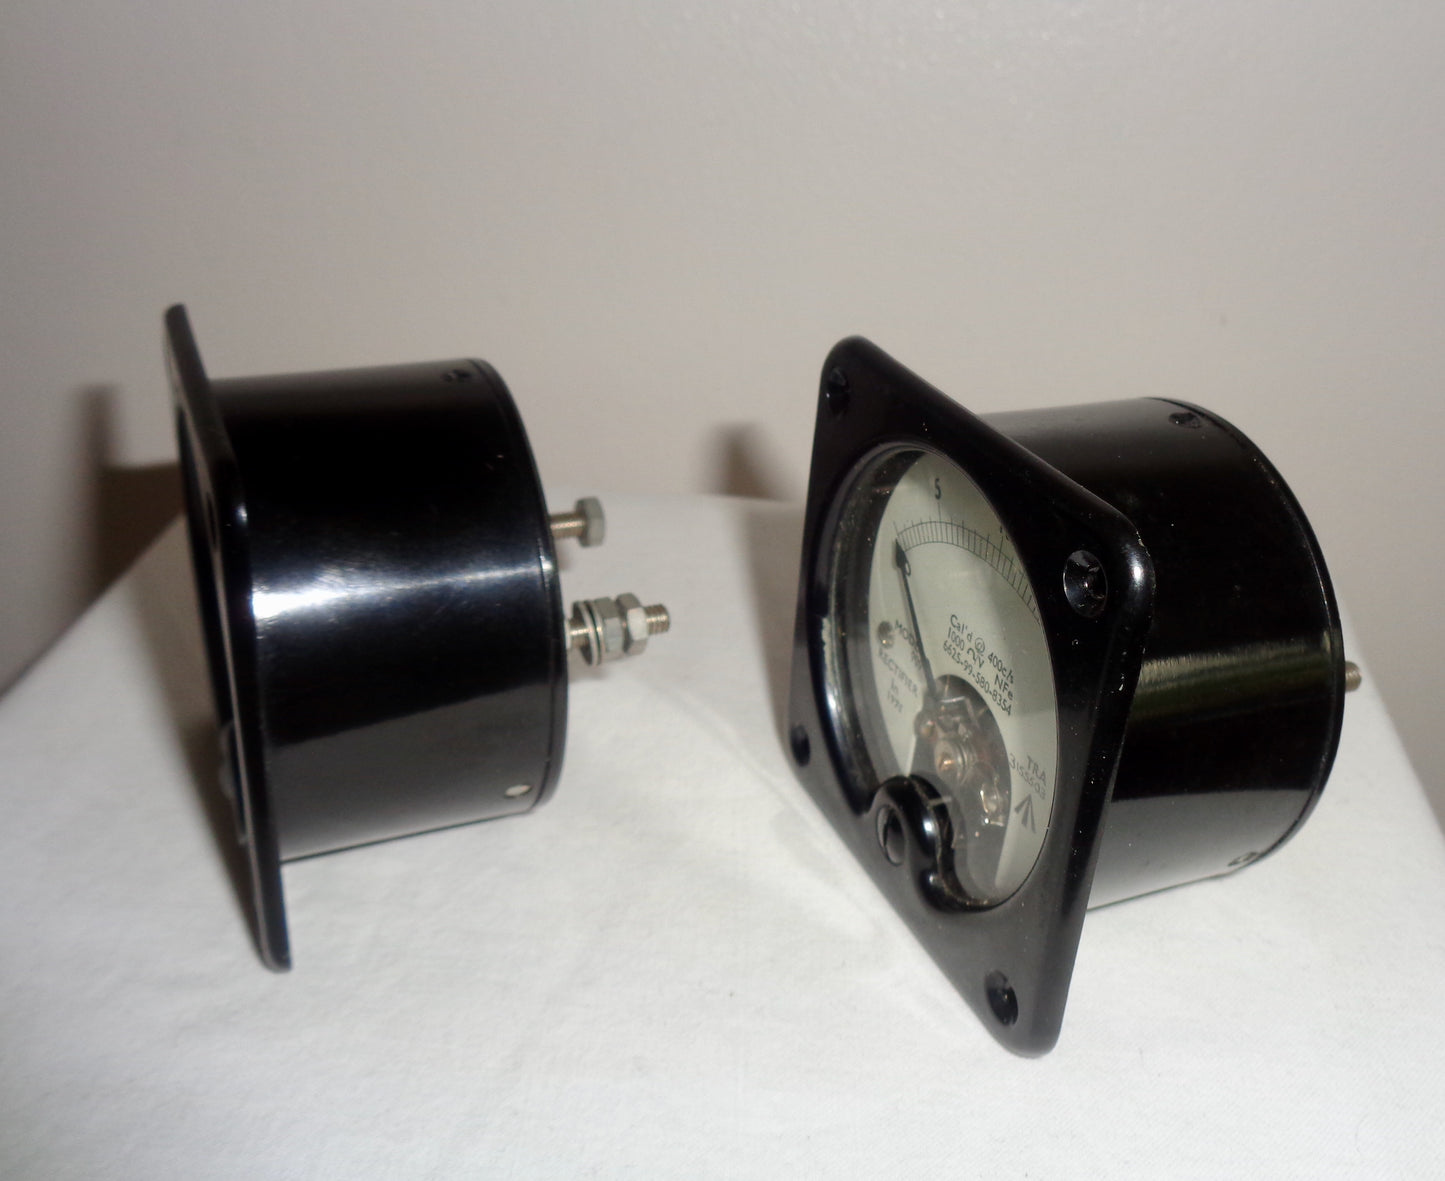 Pair Of 1975 British Military Moving Coil Model 909 Voltmeters Model 909. 20 Volt DC FSD 2" Square